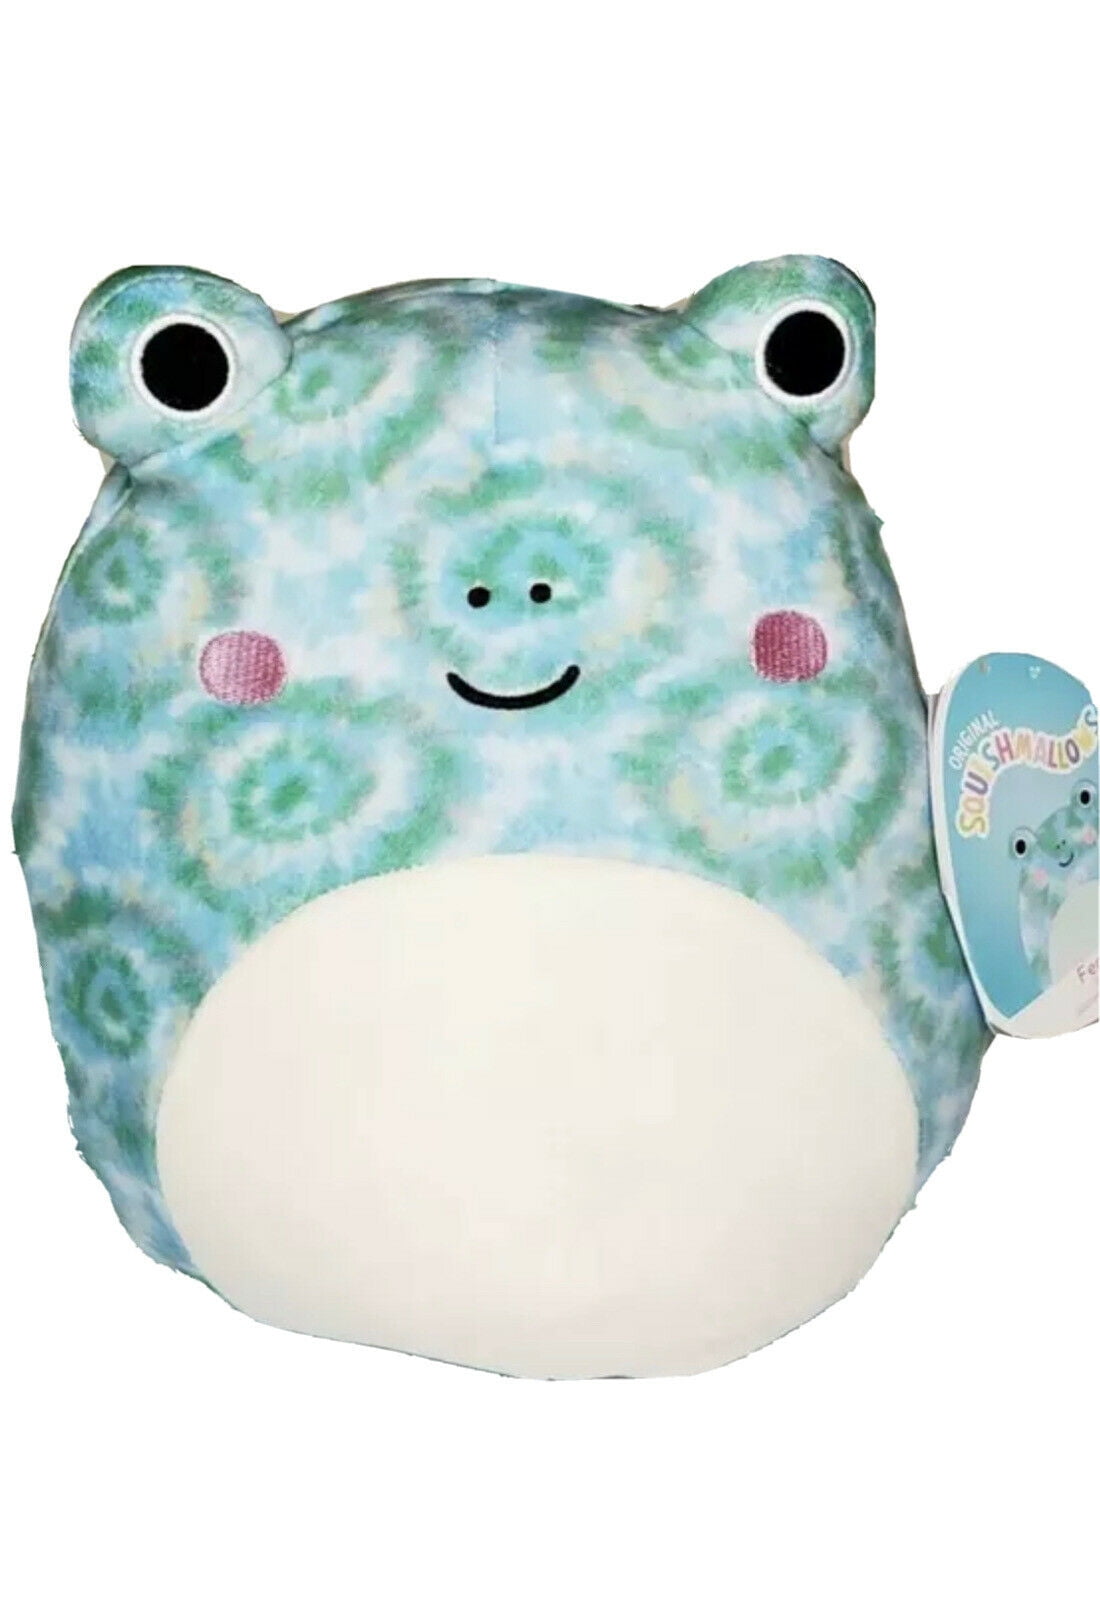 Squishmallows FERDIE the FROG 11H New